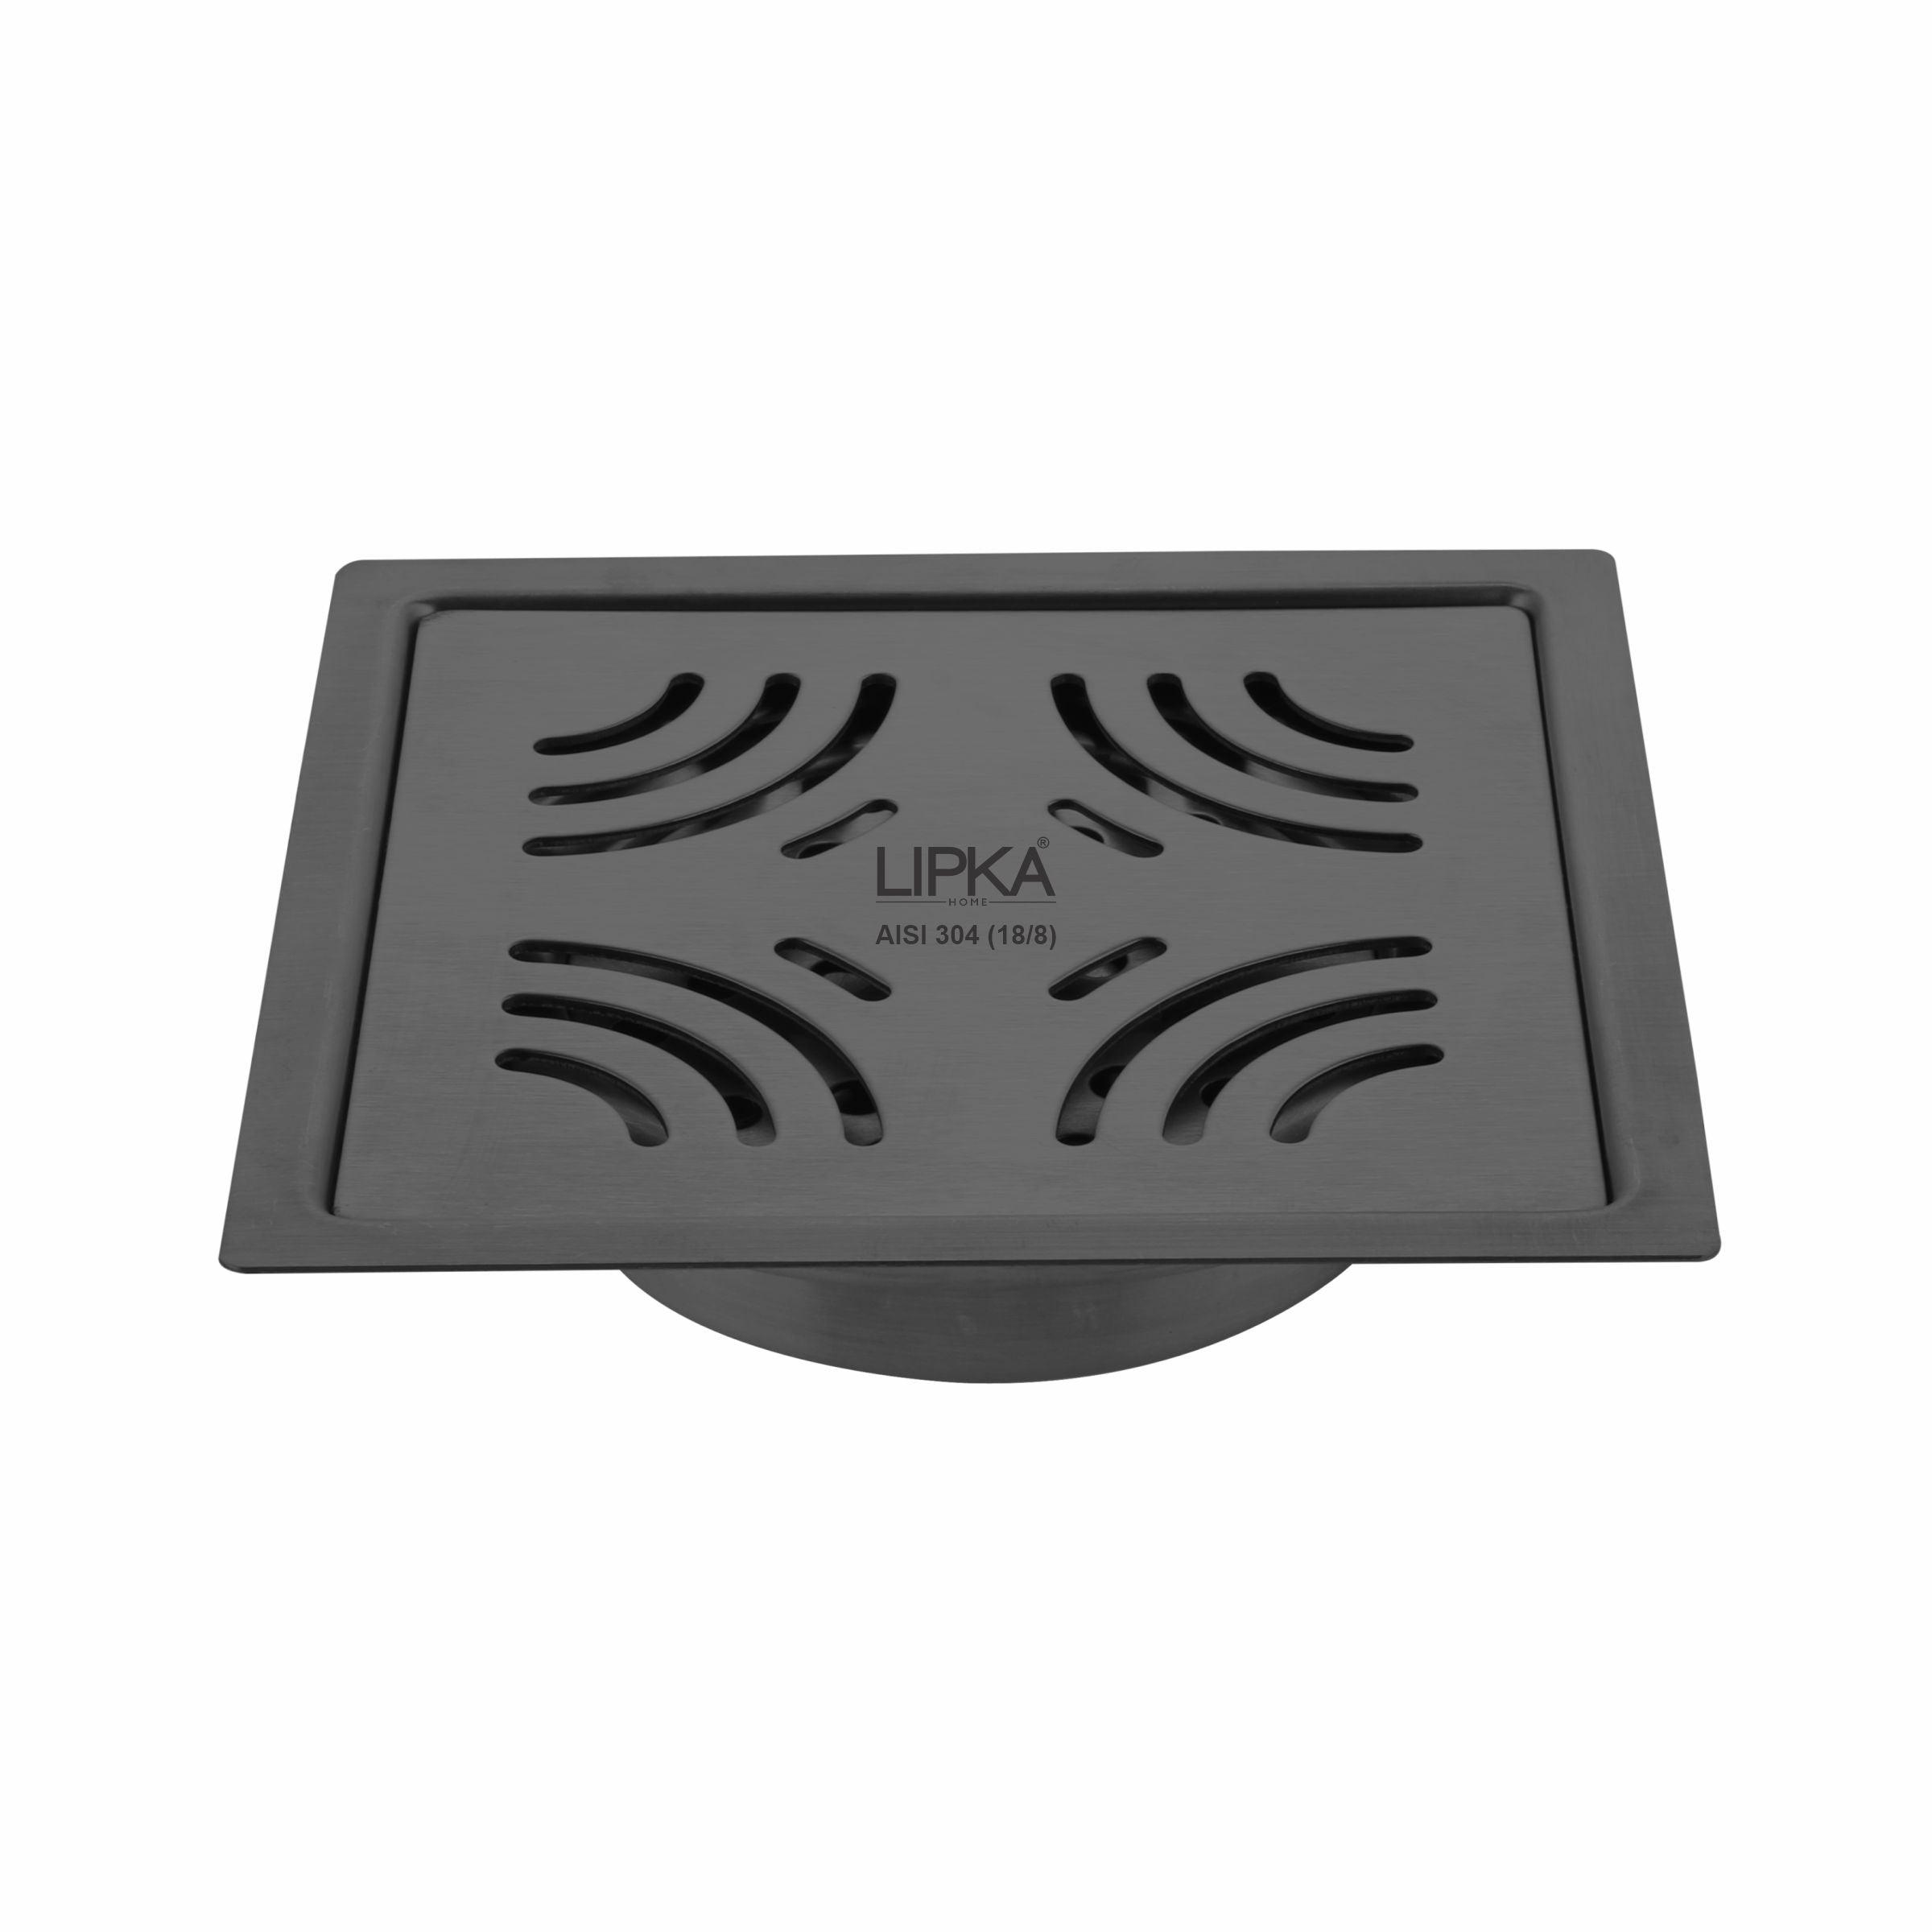 Purple Exclusive Square Flat Cut Floor Drain in Black PVD Coating (6 x 6 Inches) with Cockroach Trap